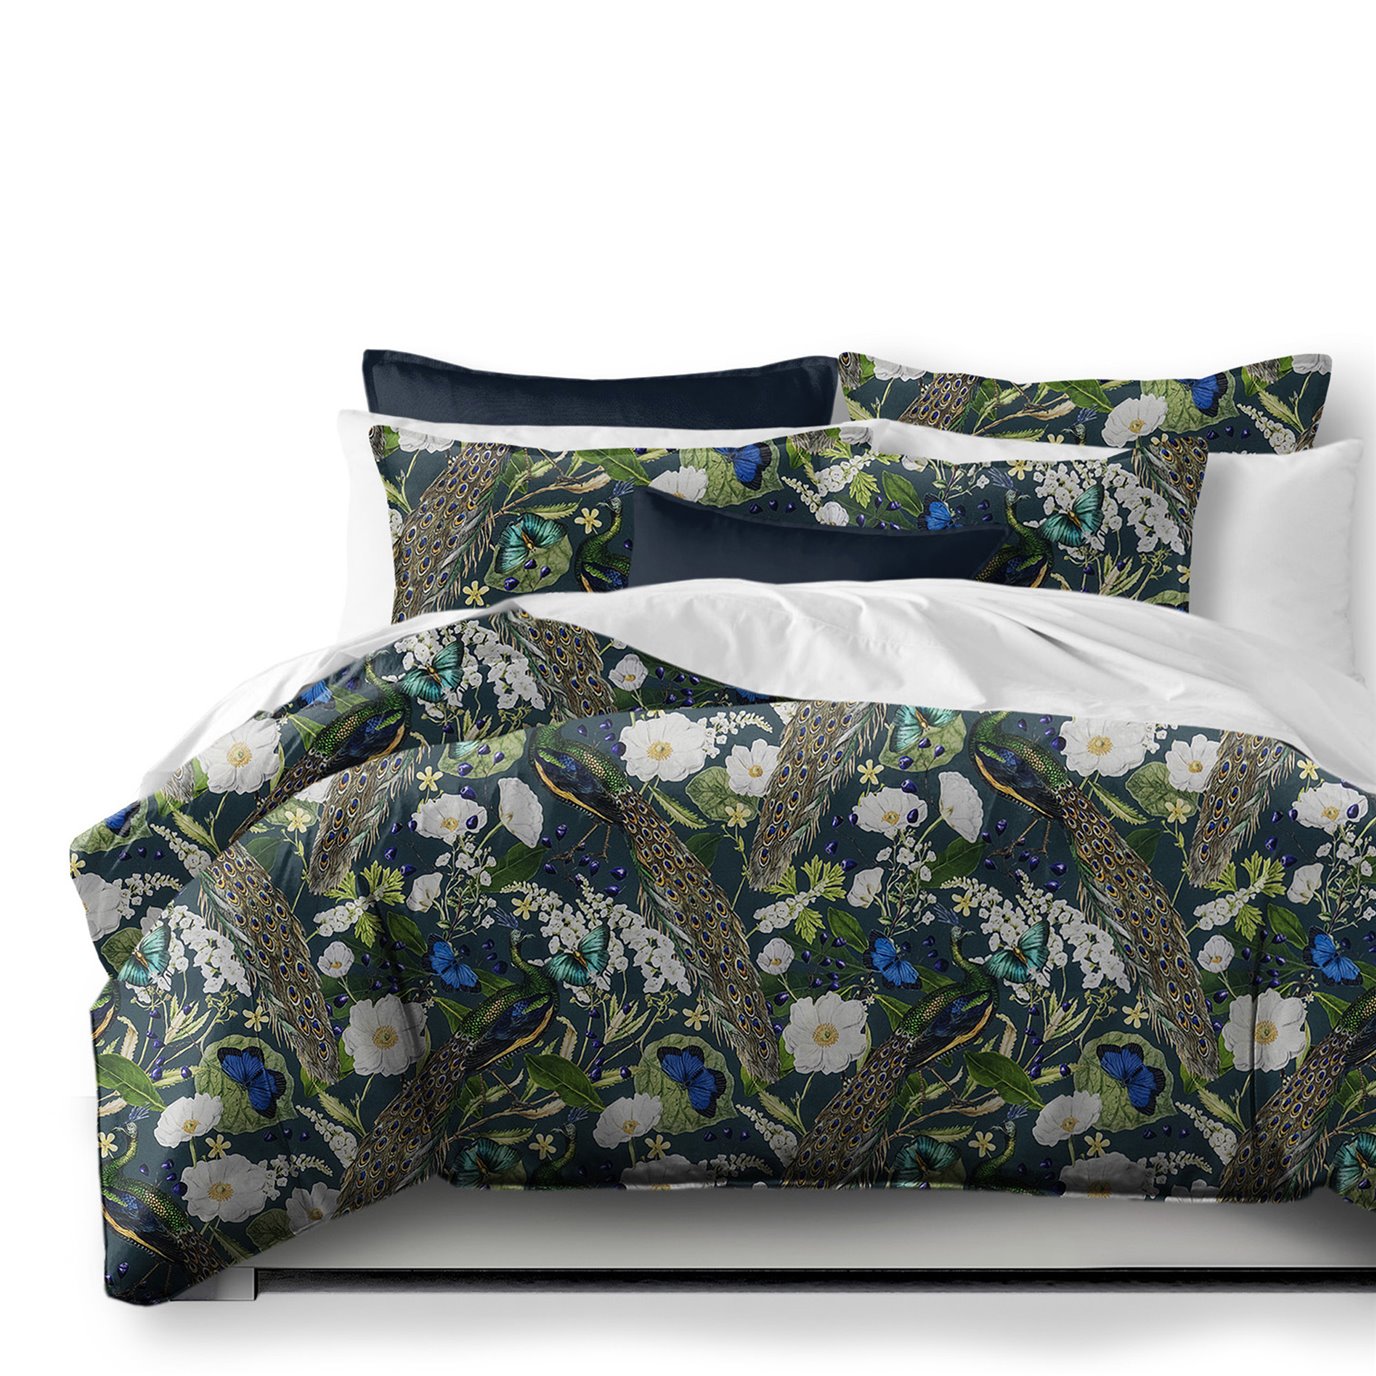 Peacock Print Teal/Navy Comforter and Pillow Sham(s) Set - Size Super King